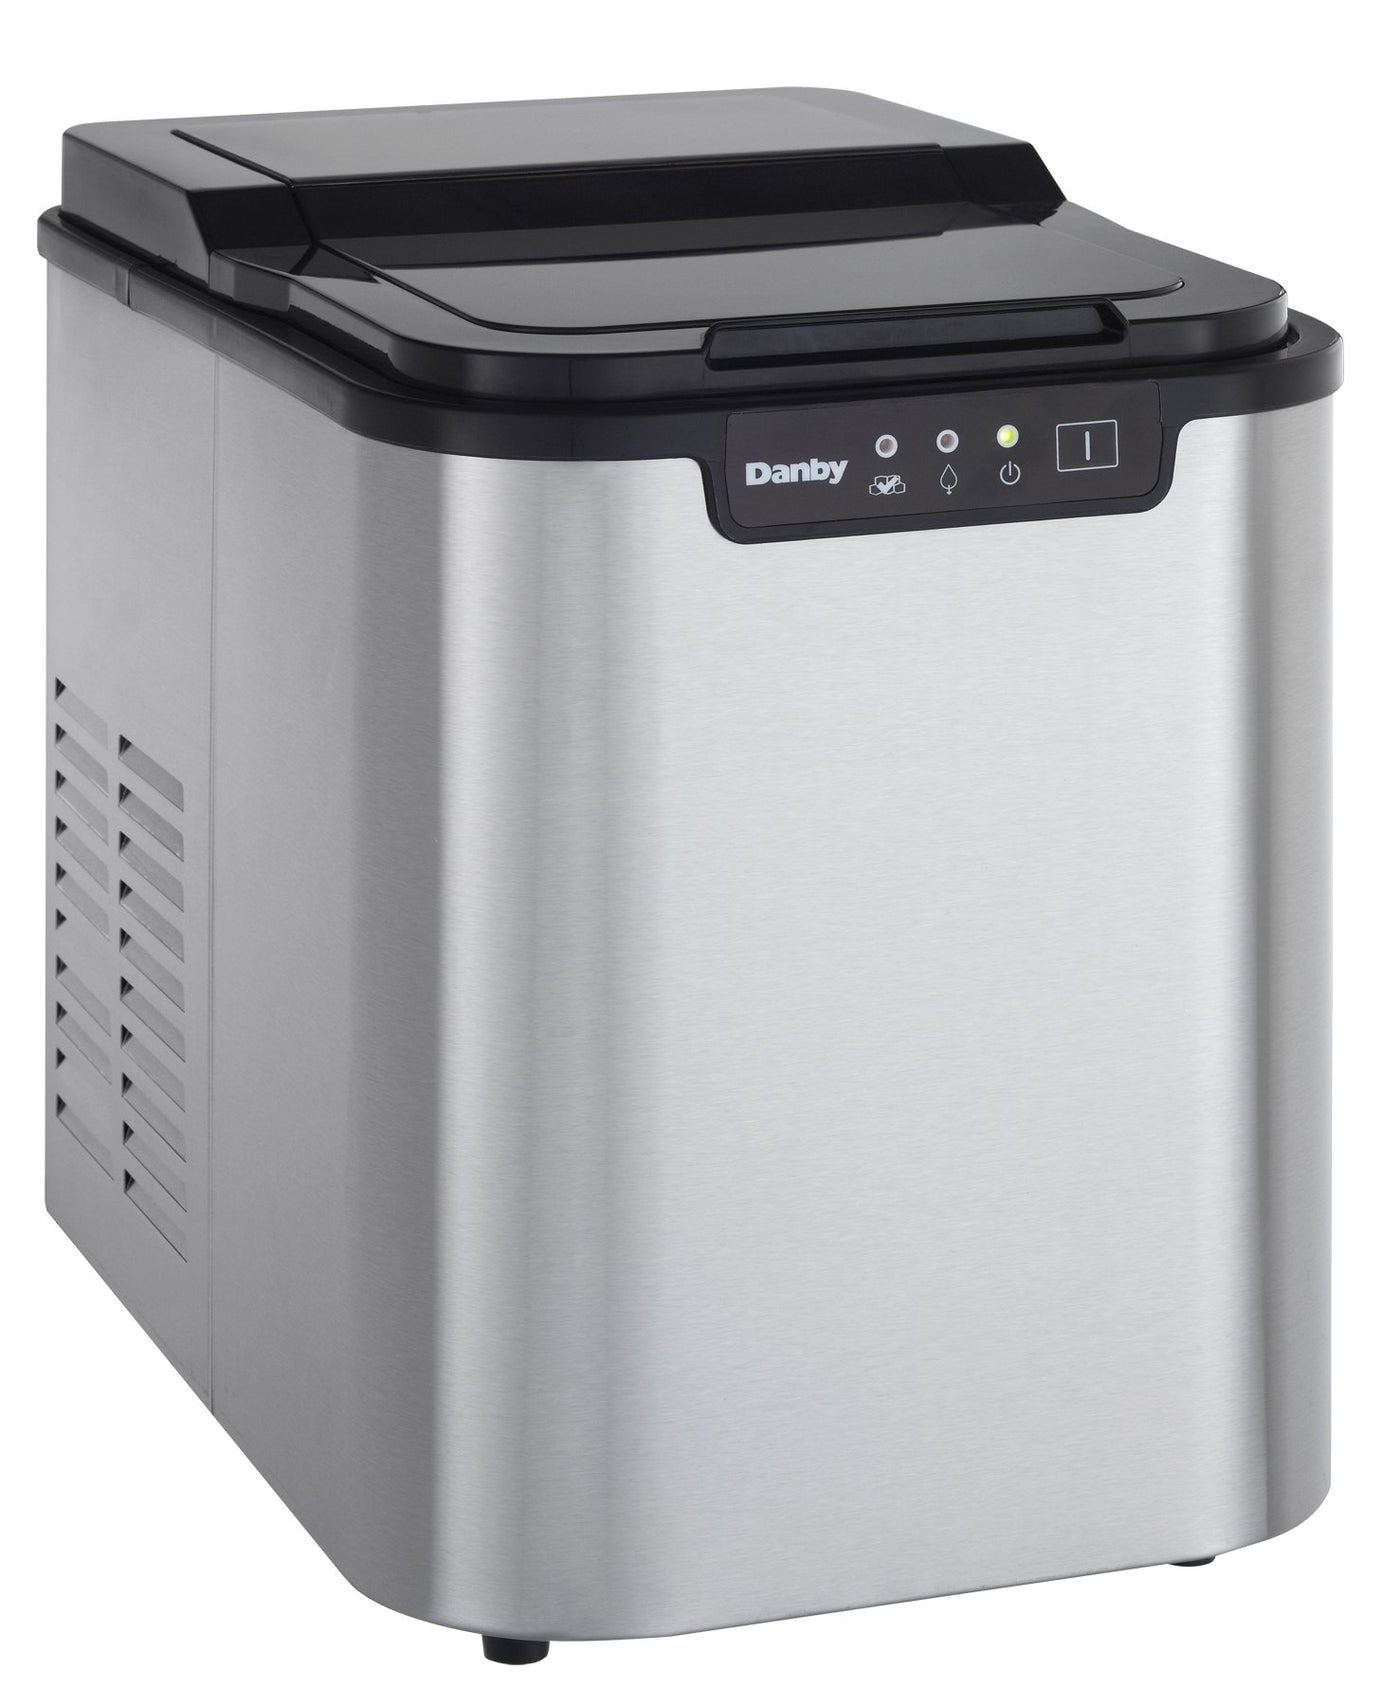 Danby Stainless Steel Ice Maker (25 lbs per day) - DIM2500SSDB